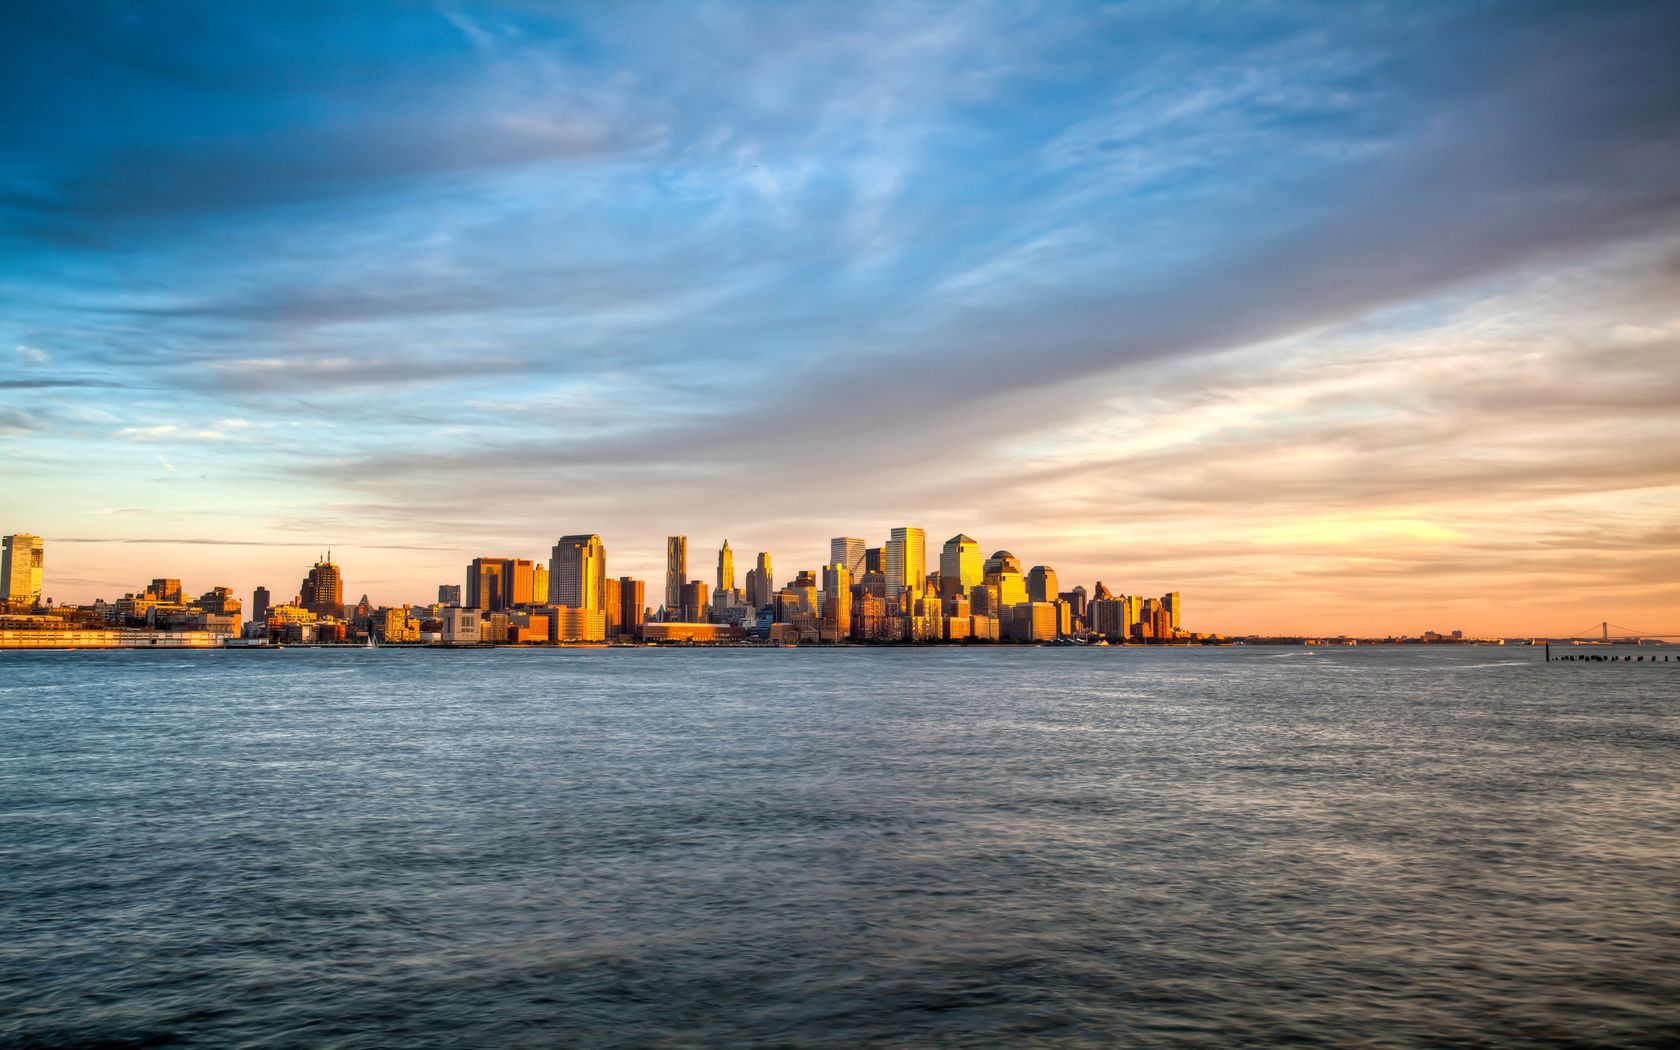 landscape, cities, water, sunset, sky, sea, clouds, waves, overview, review, evening, view, island, new york, manhattan